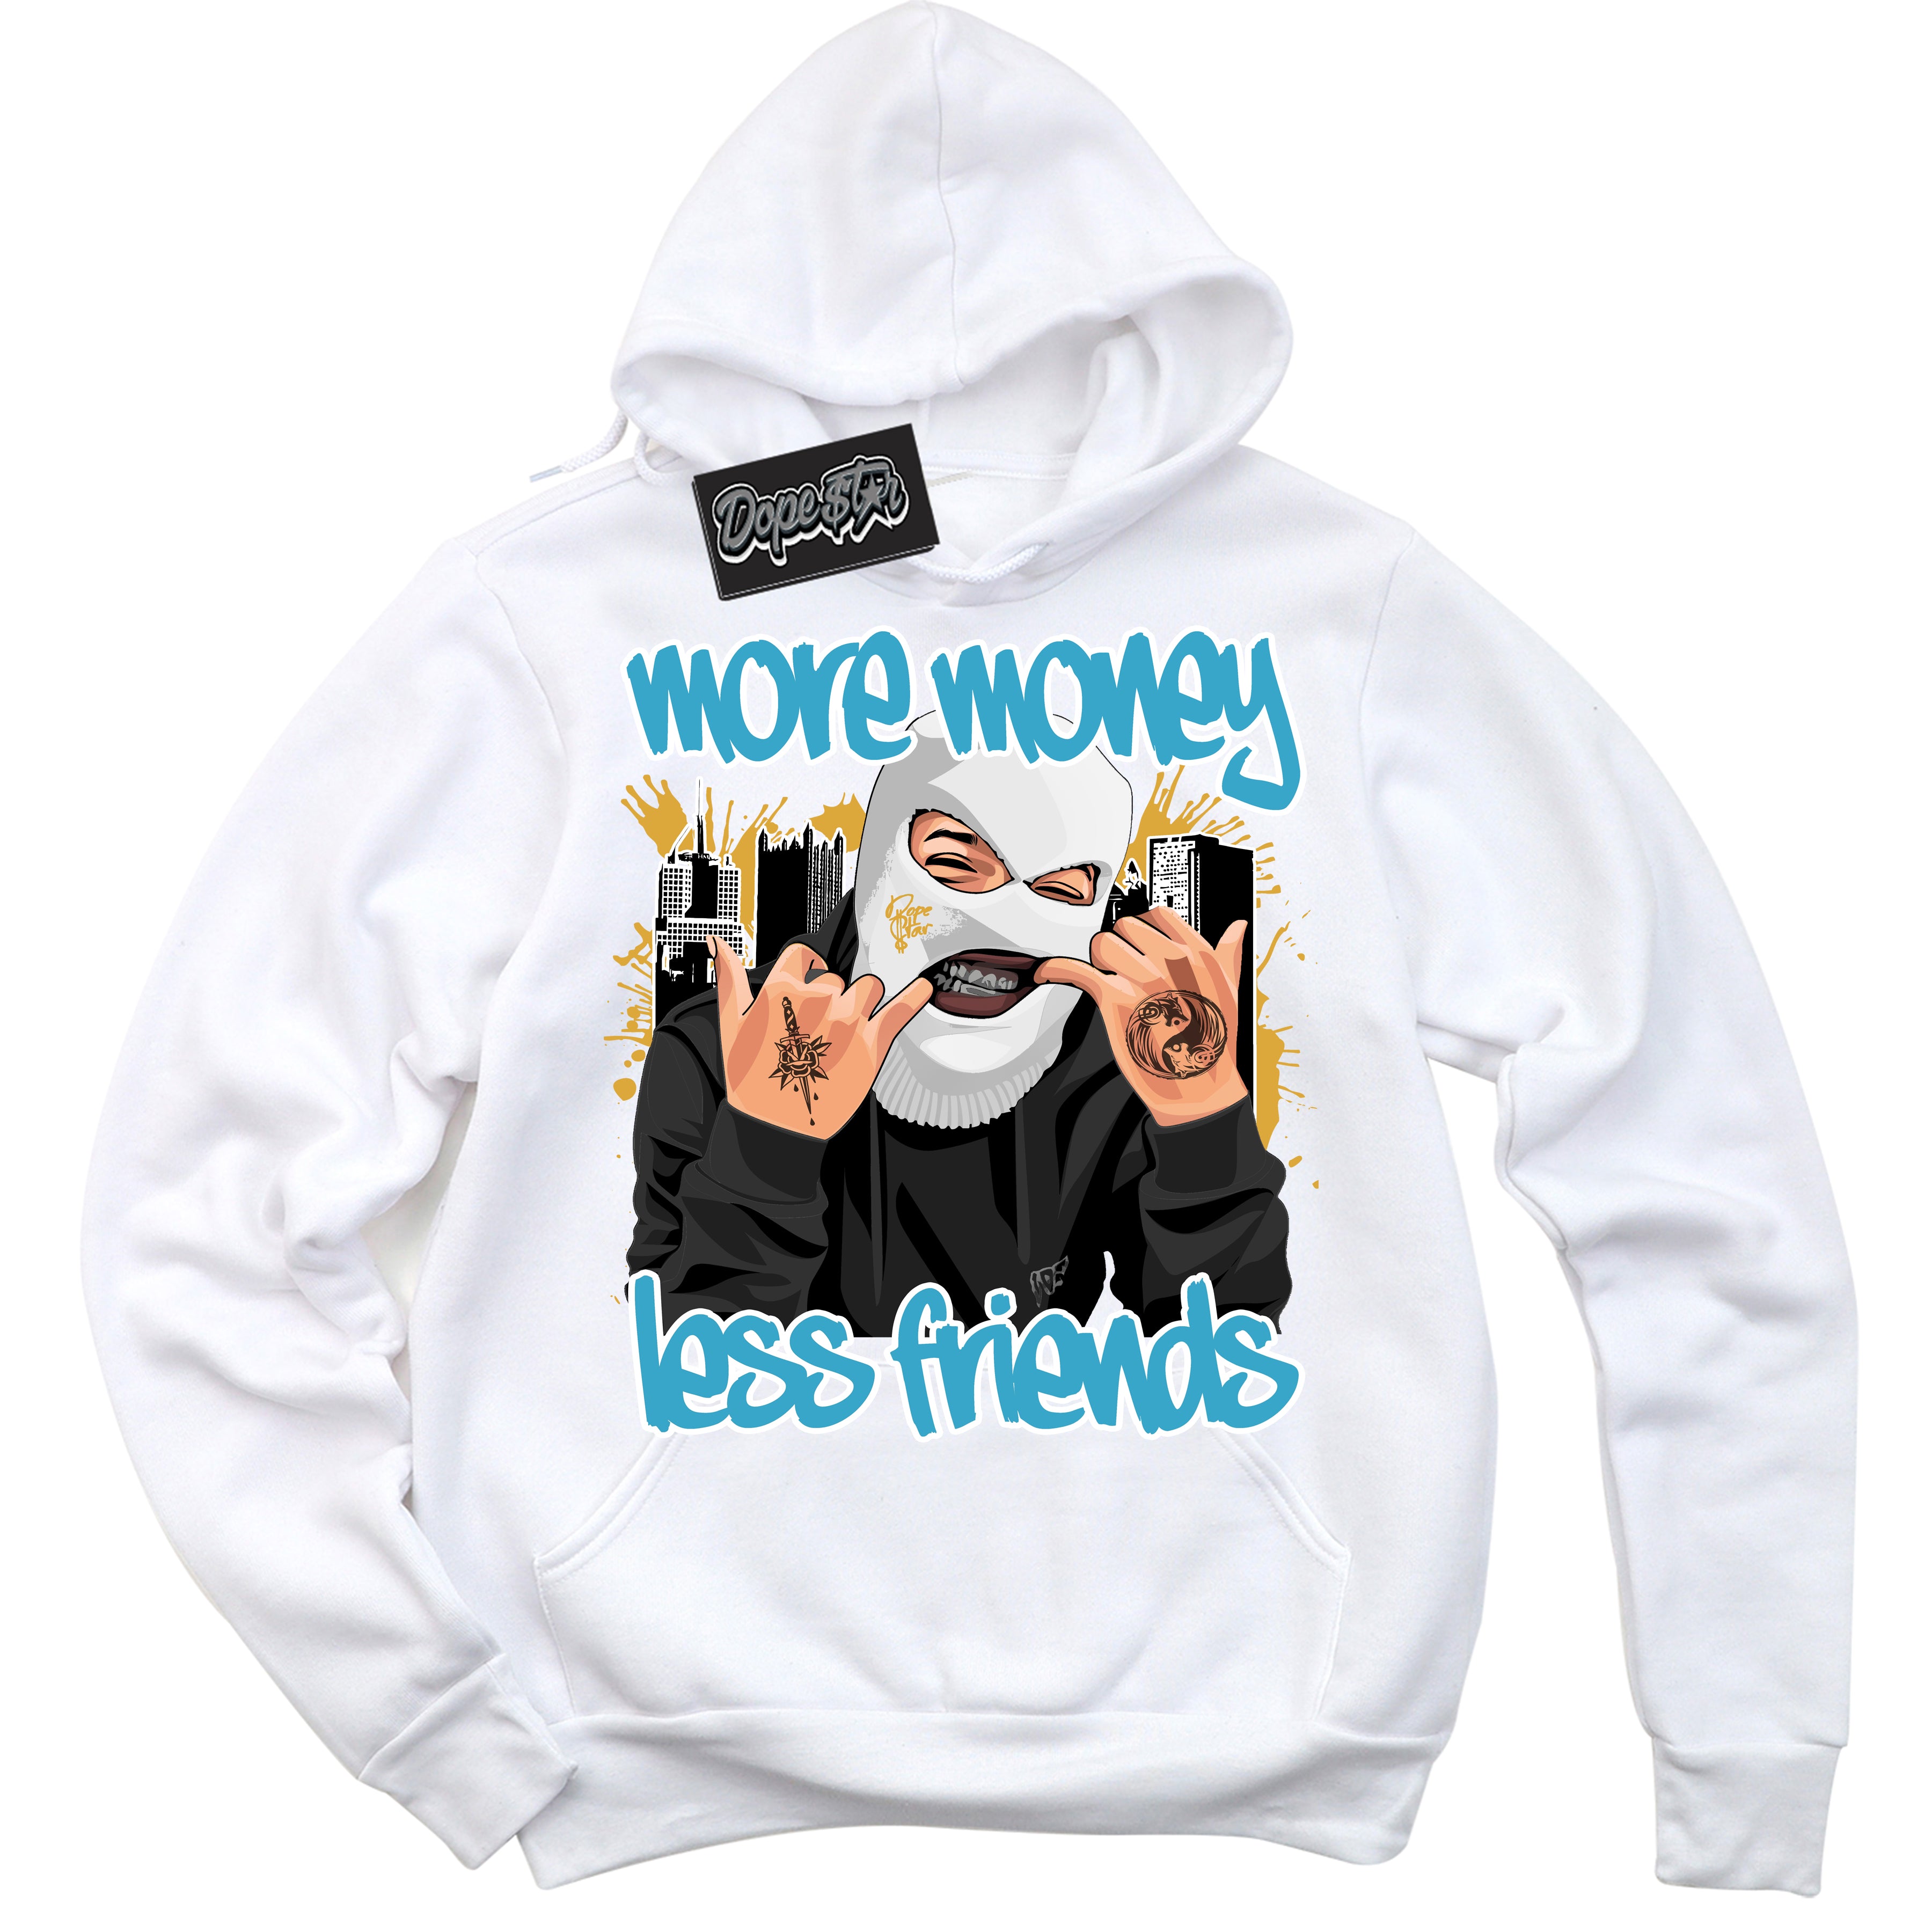 Cool White Hoodie with “ More Money Less Friends ”  design that Perfectly Matches Aqua 5s Sneakers.